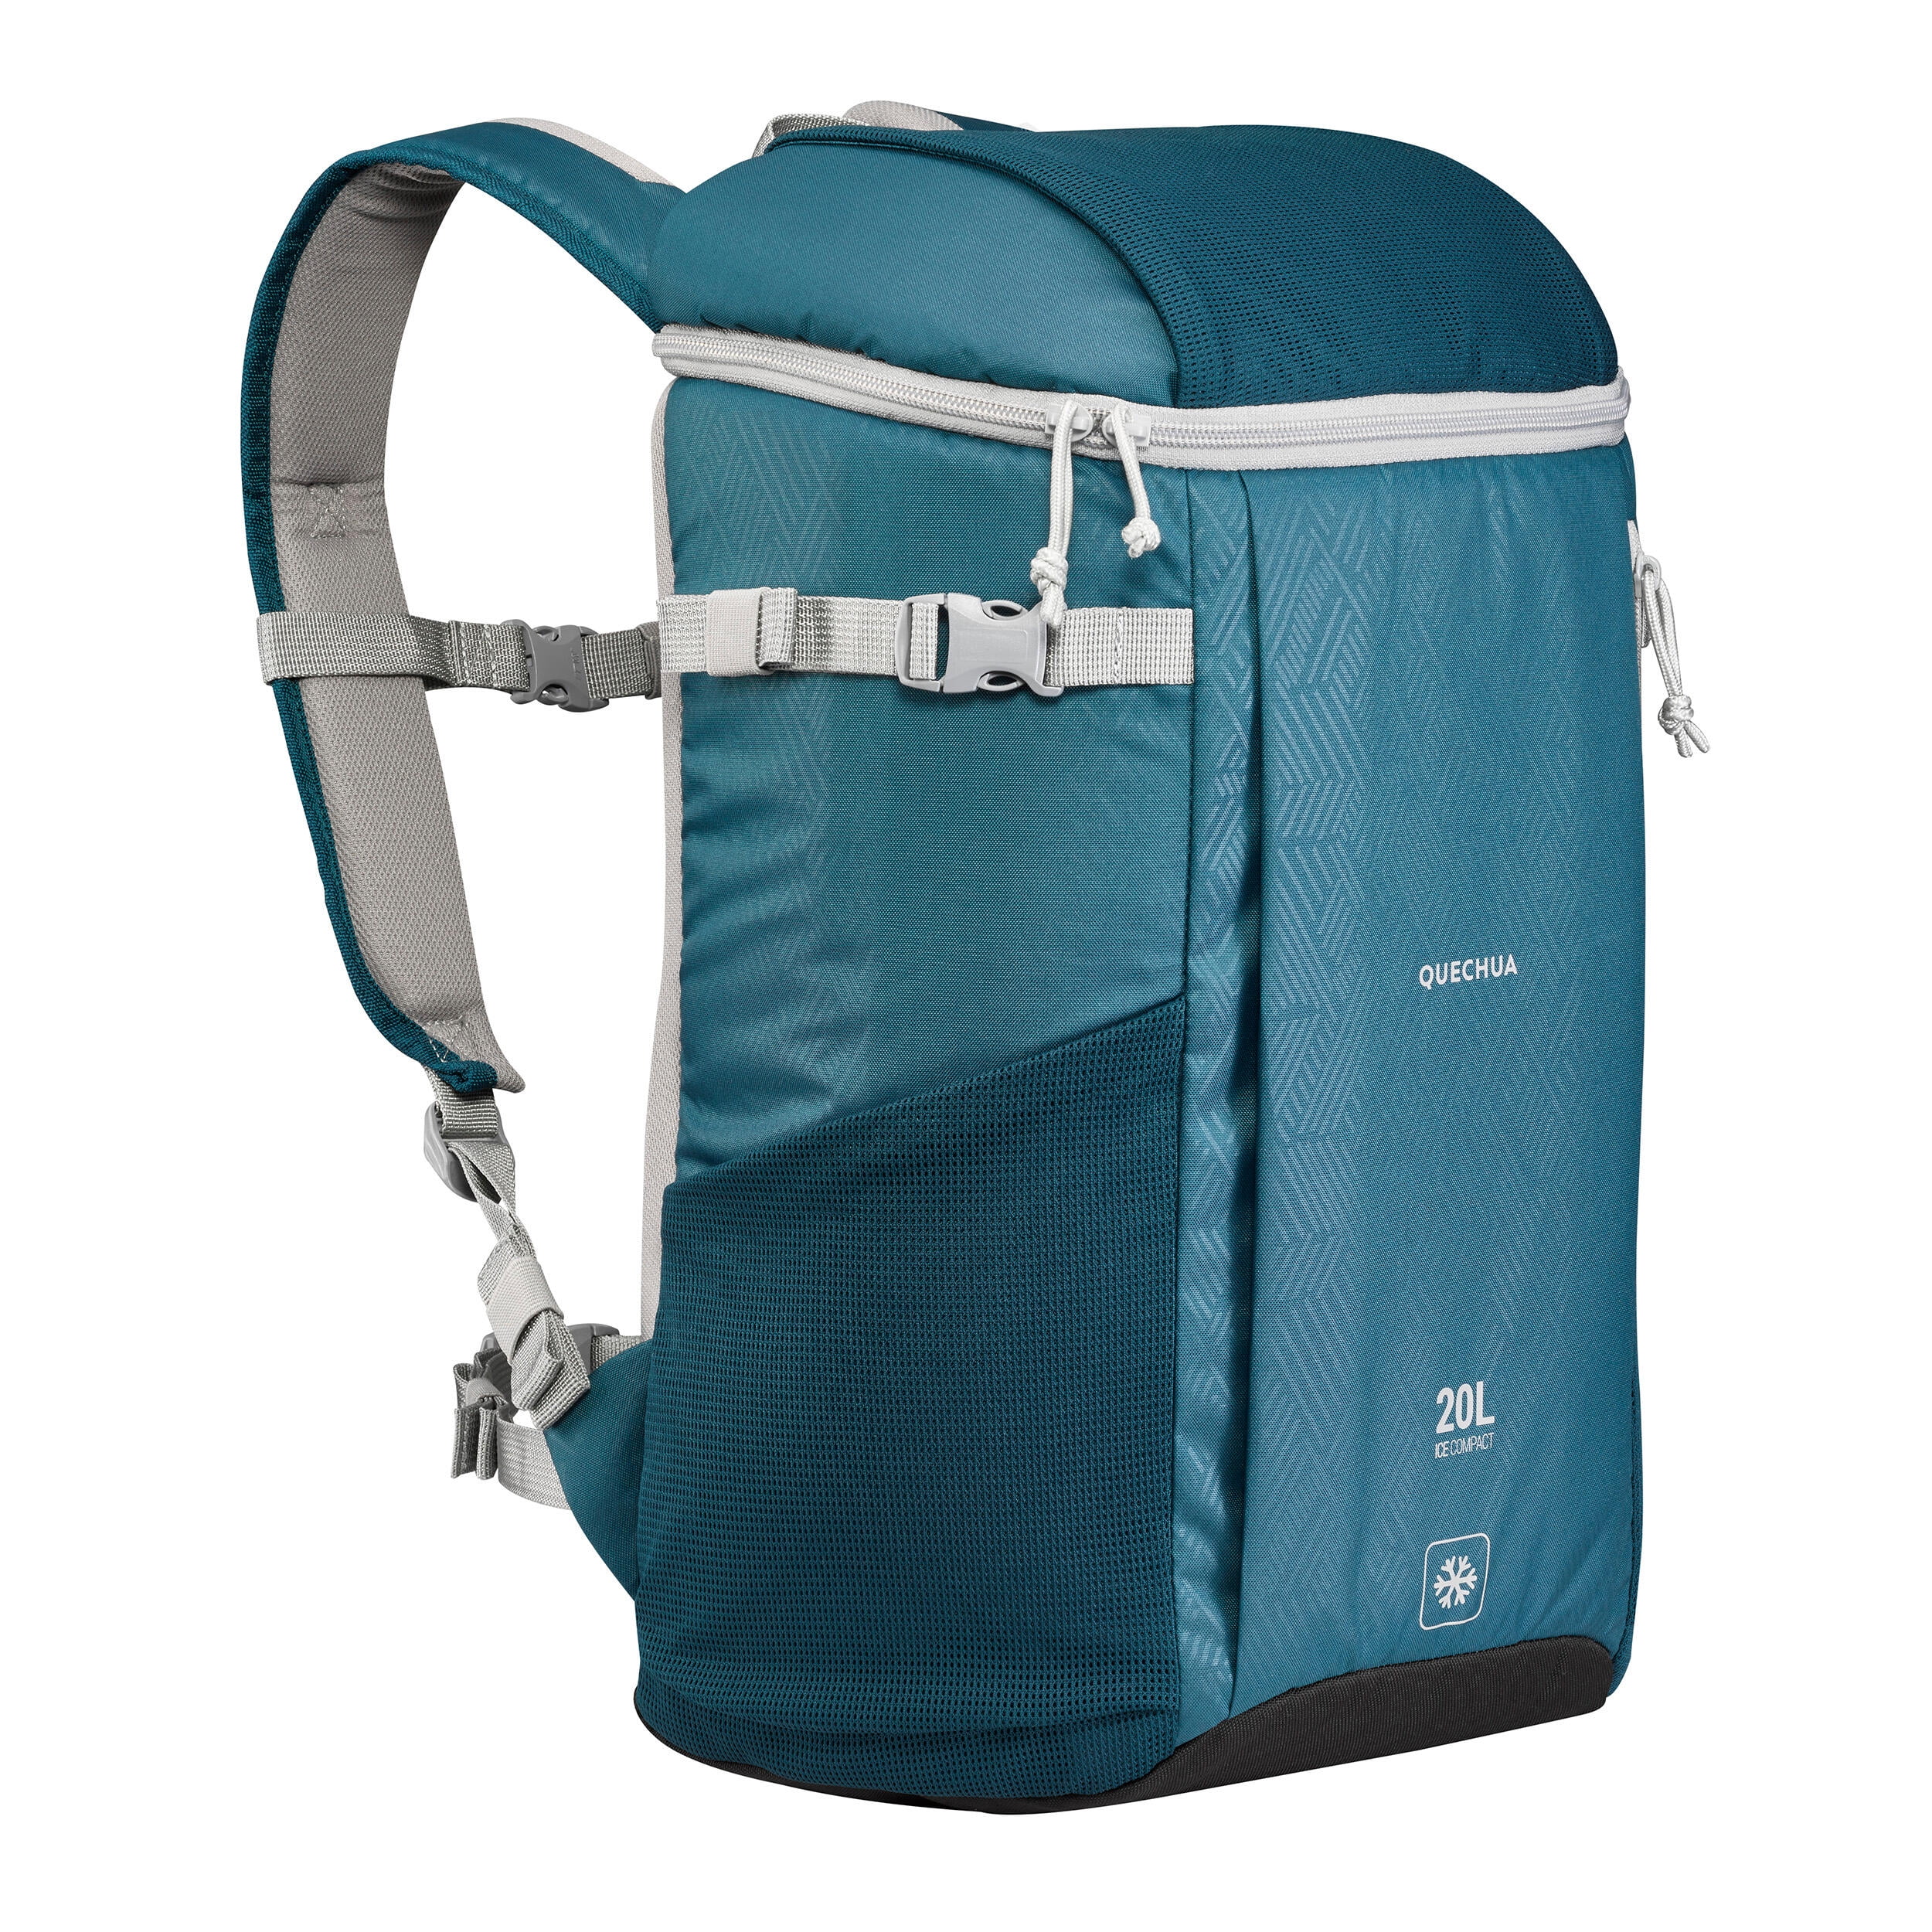 Decathlon Quechua Ice Compact, 20L Camping and Hiking Cooler Backpack, Blue  